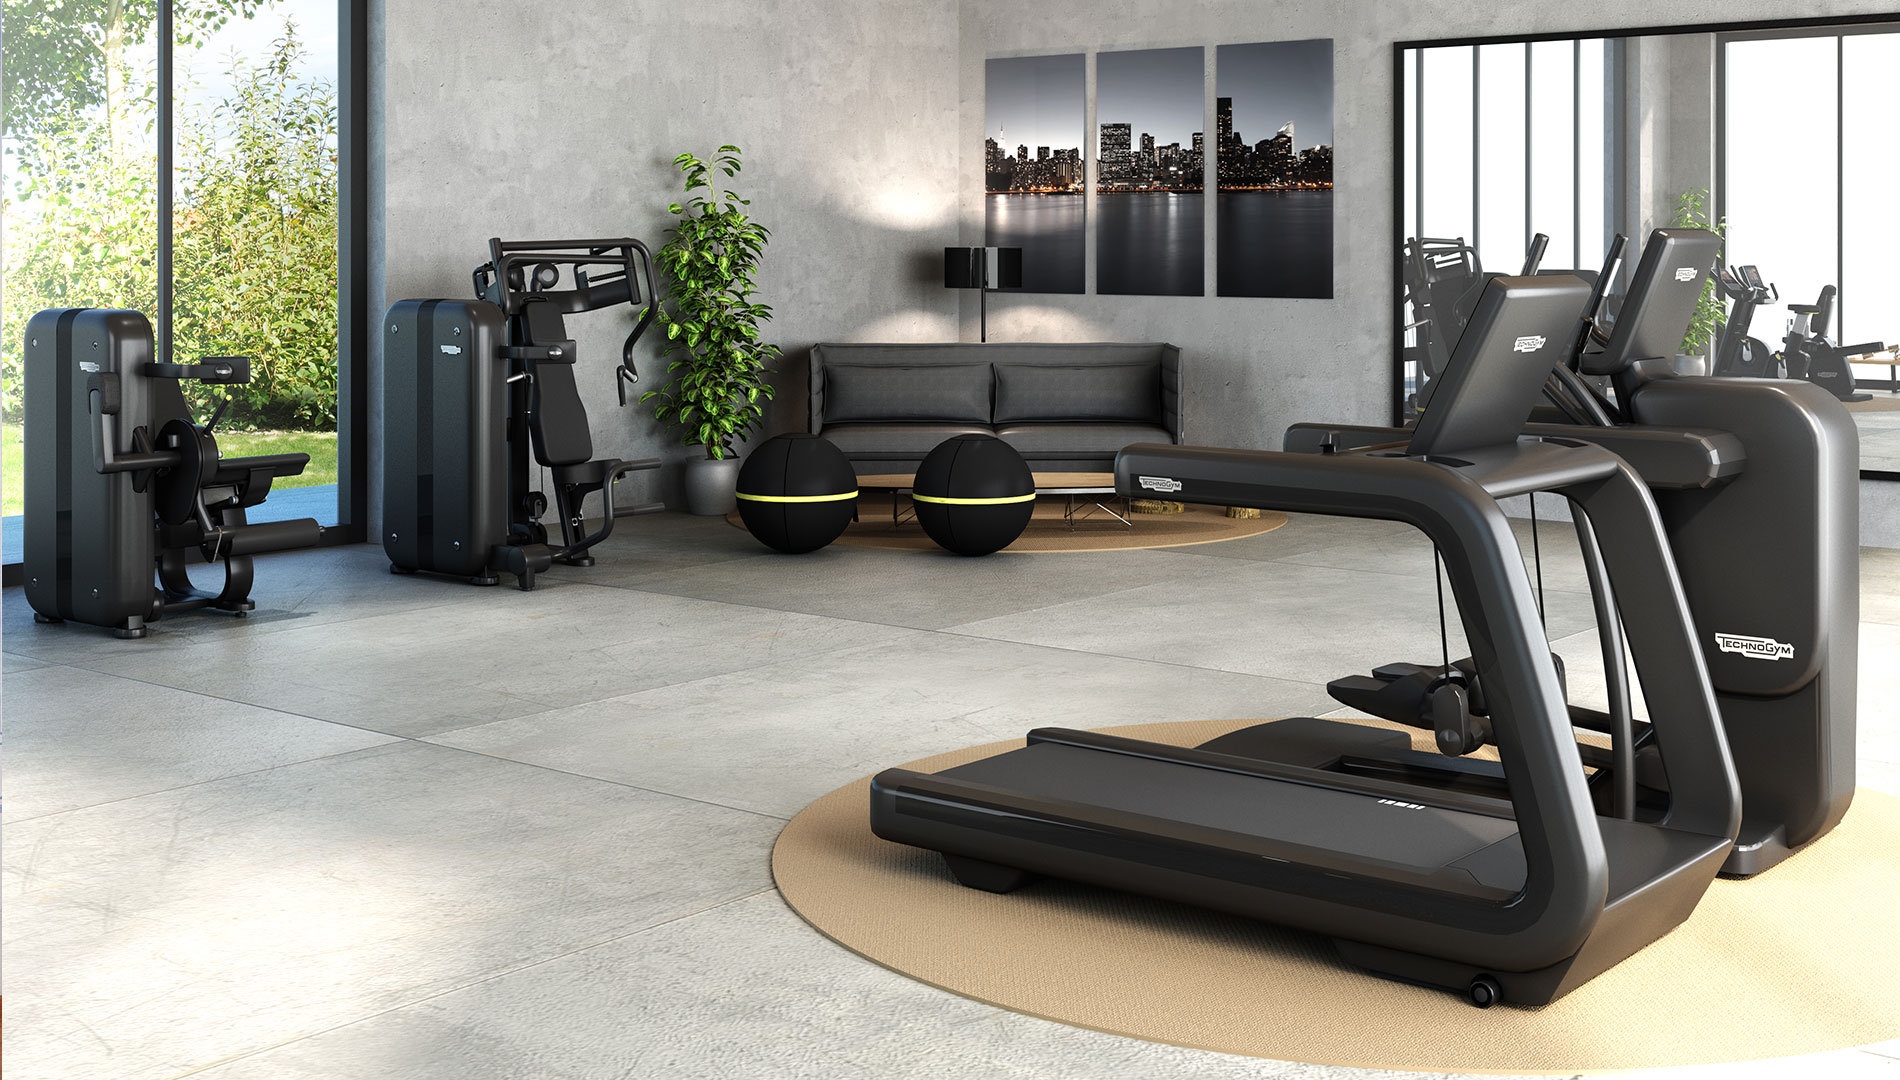 Workout at home in style?